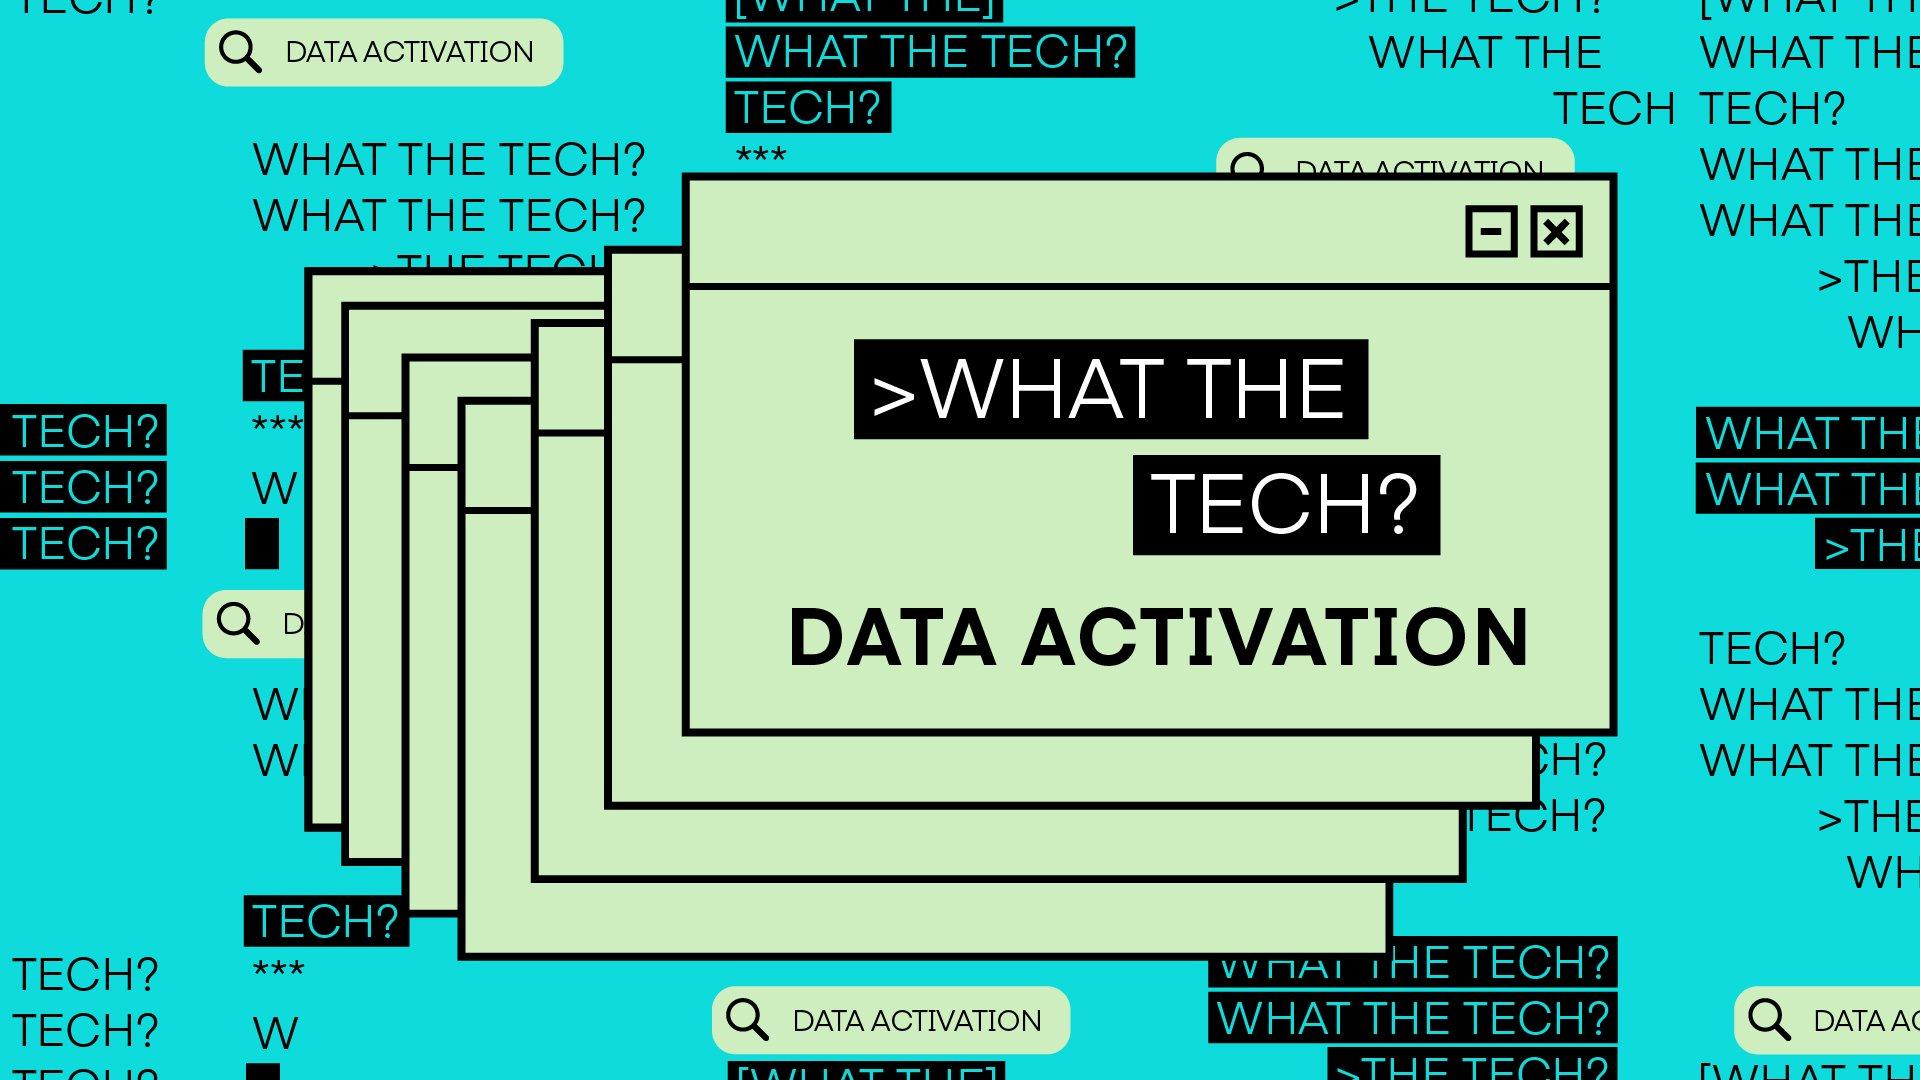 What the Tech is data activation?